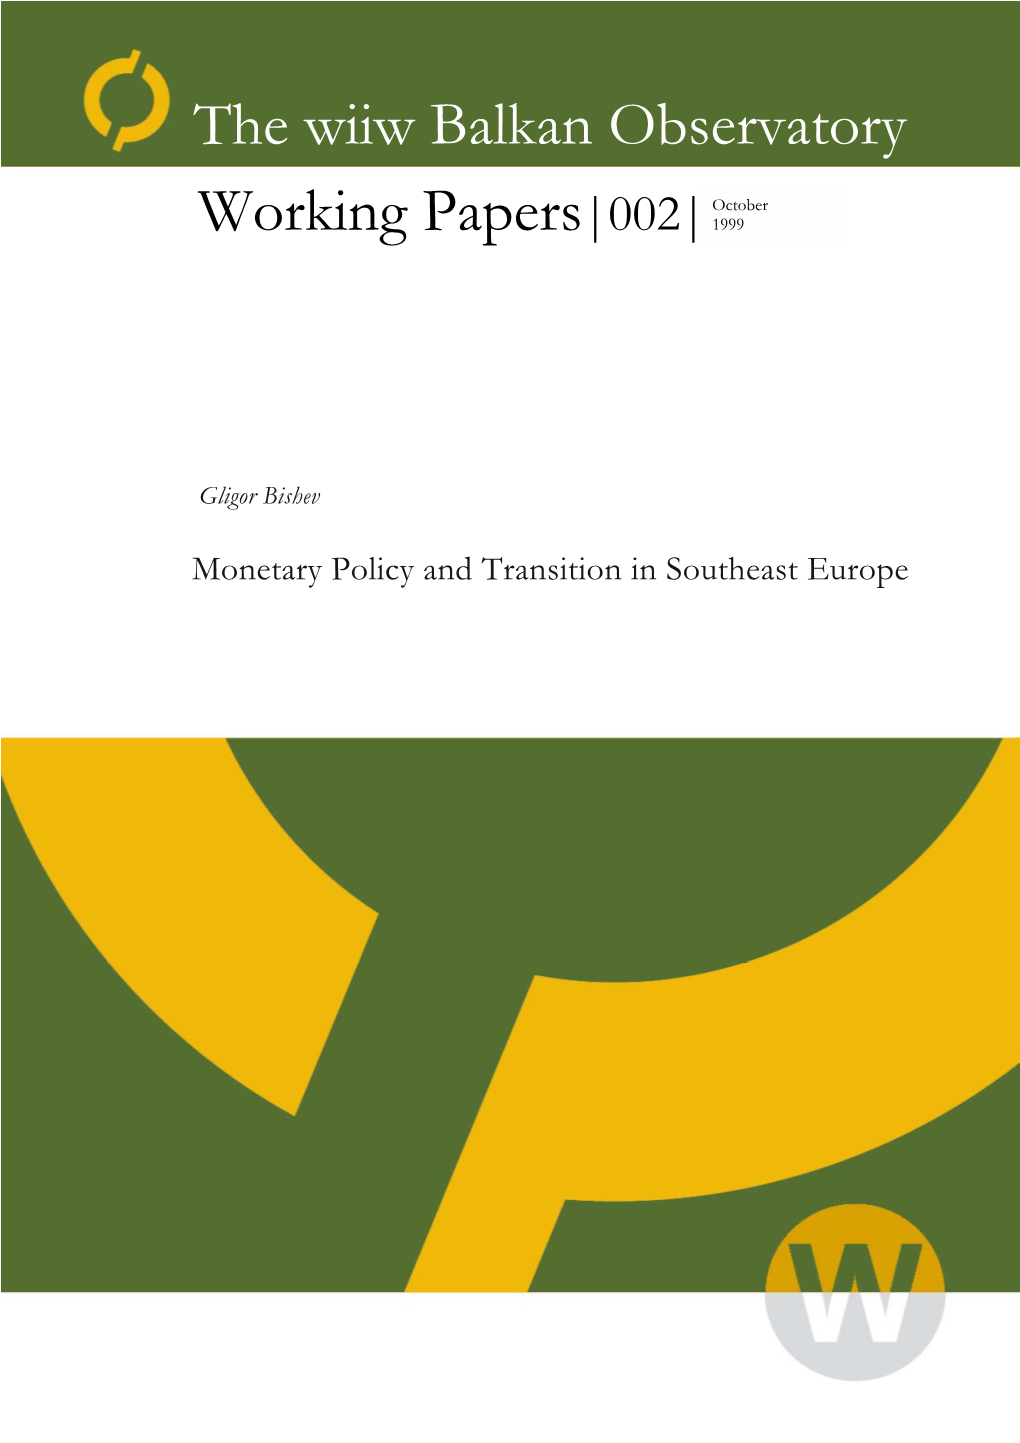 Monetary Policy and Transition in Southeast Europe the Wiiw Balkan Observatory